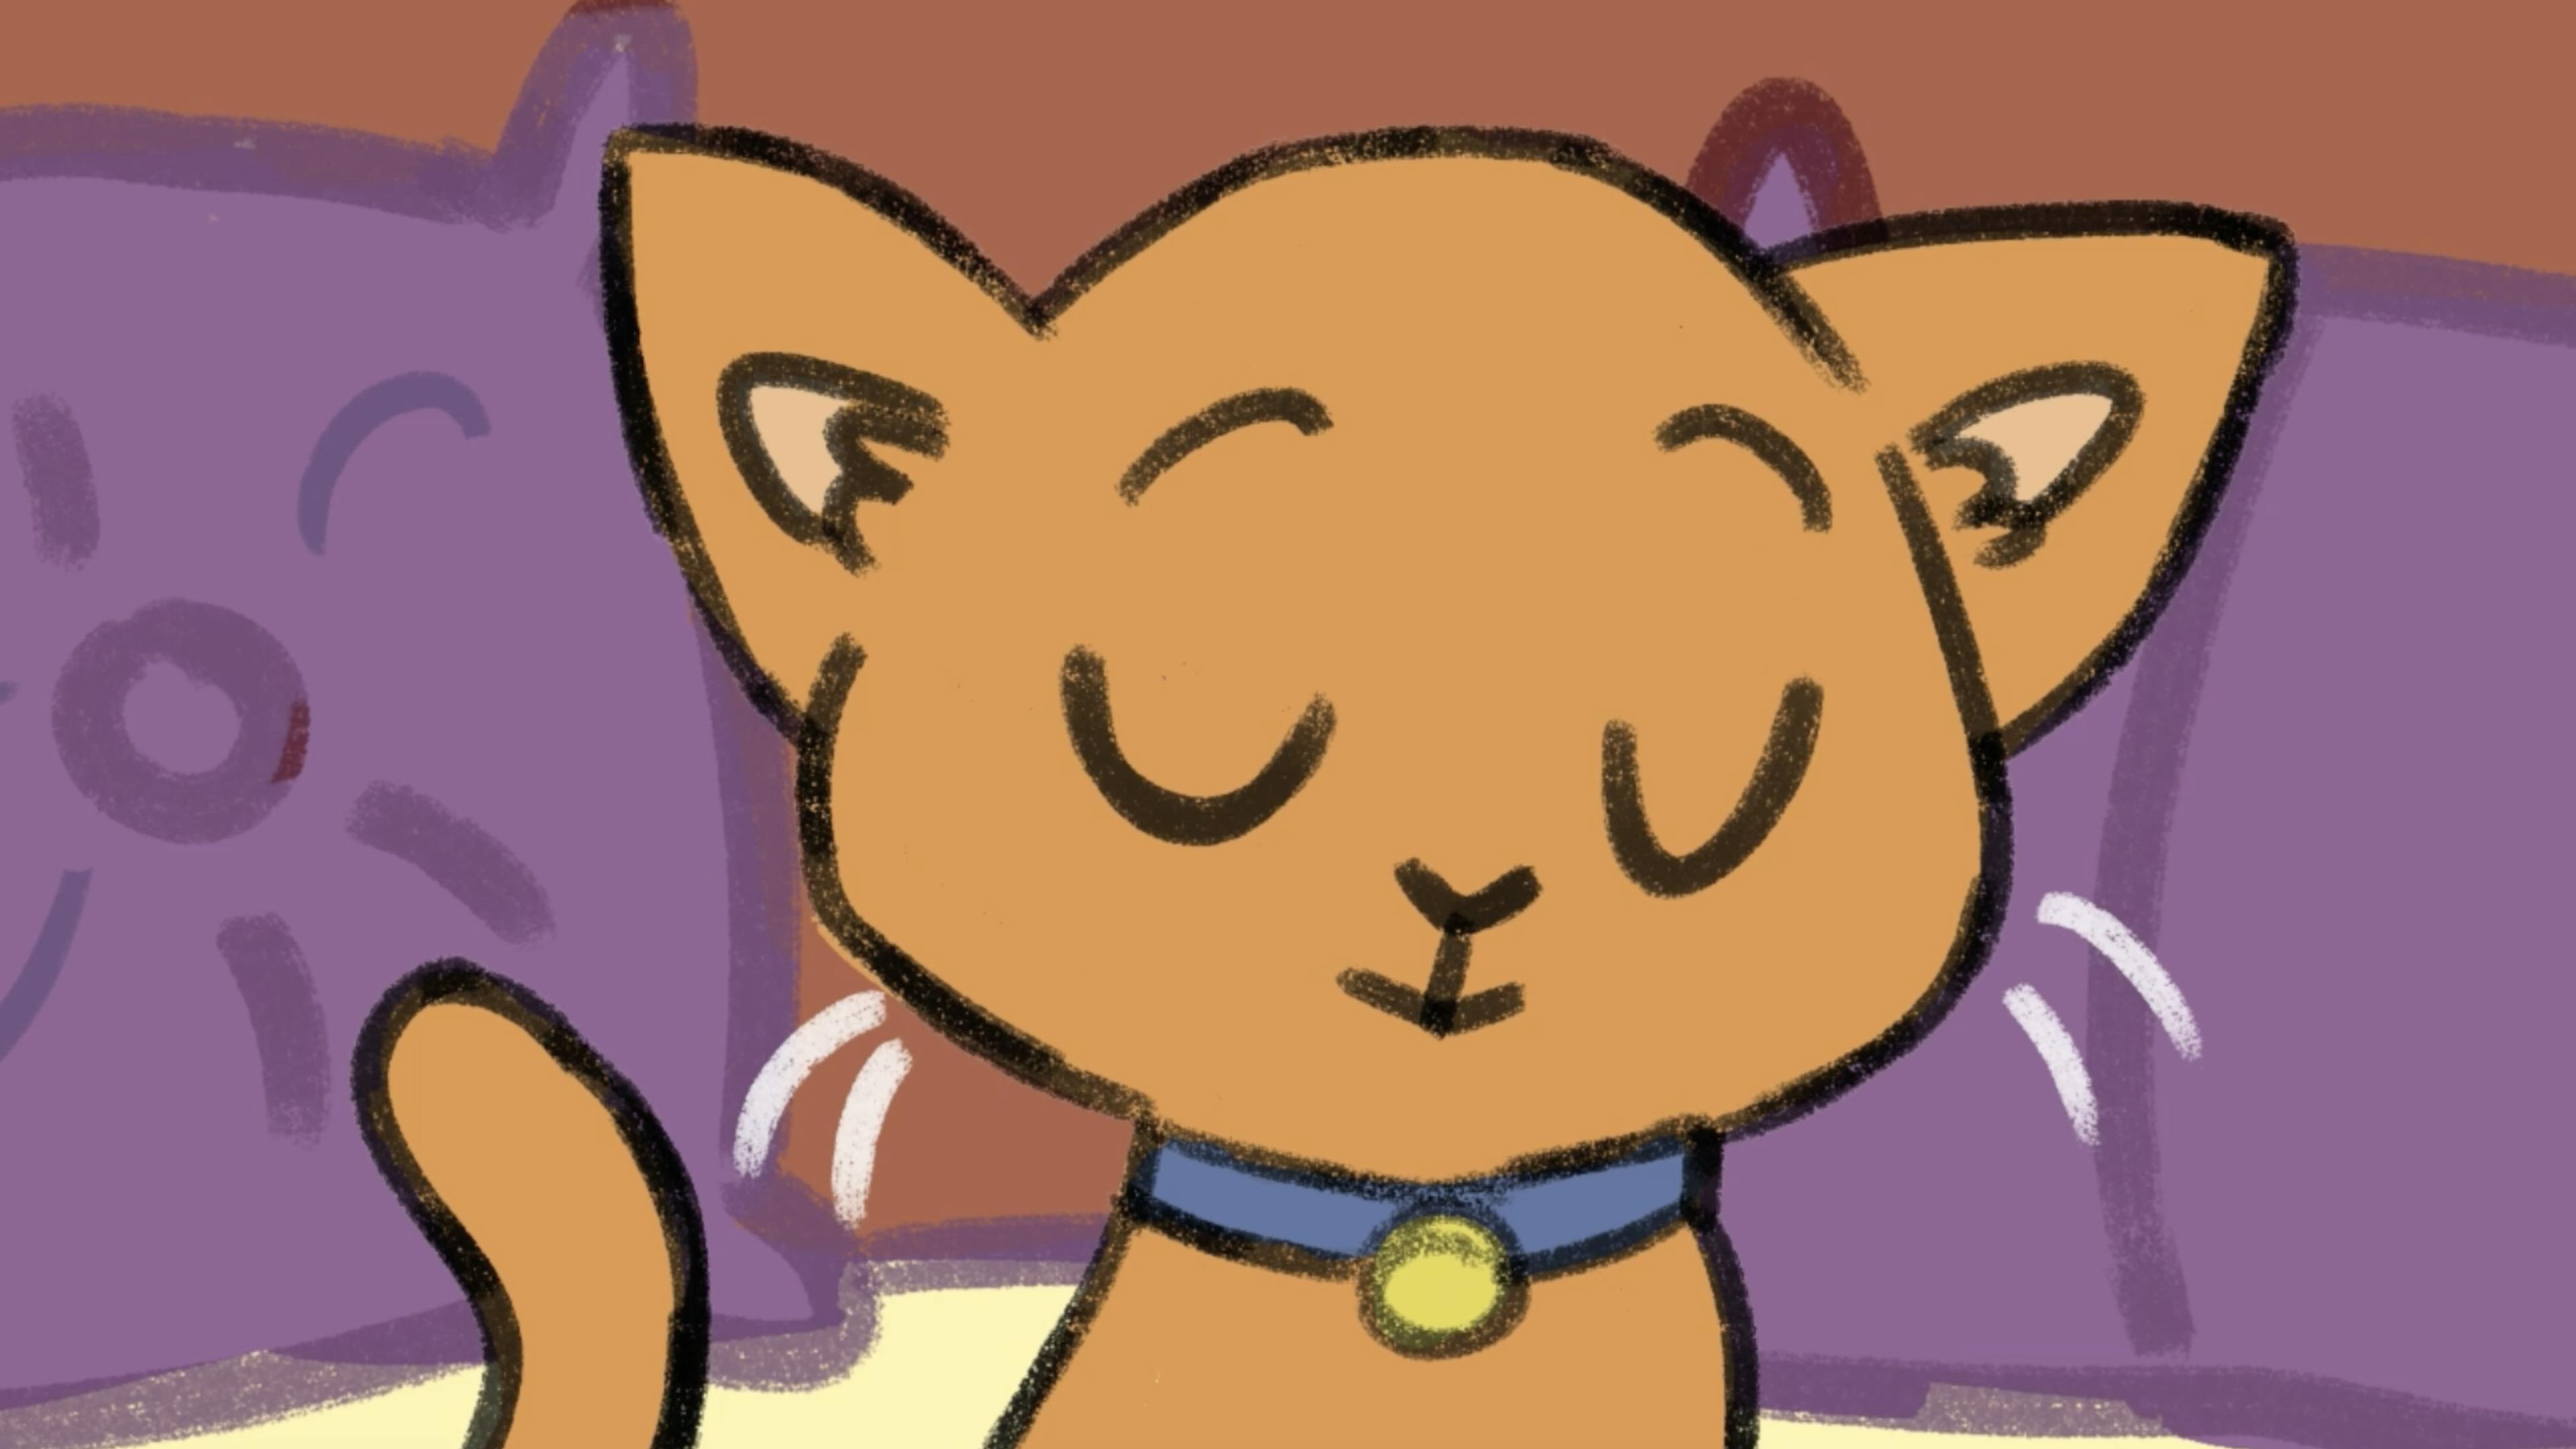 An illustration of a cat looking bashful